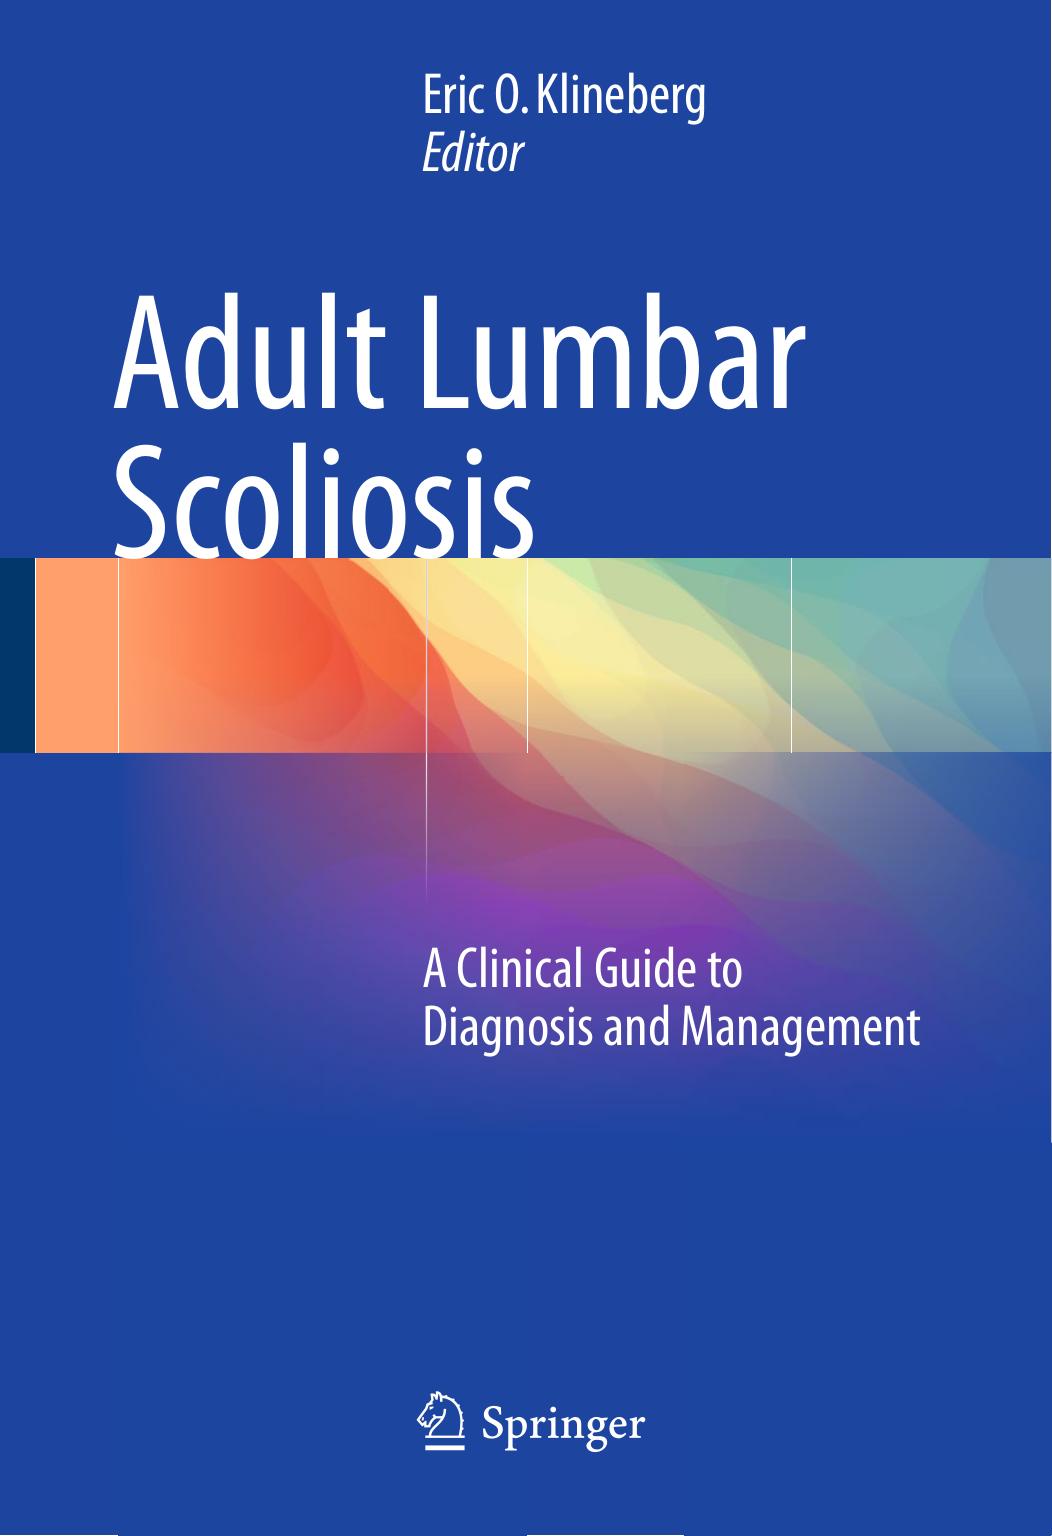 Adult Lumbar Scoliosis A Clinical Guide to Diagnosis and Management.jpg